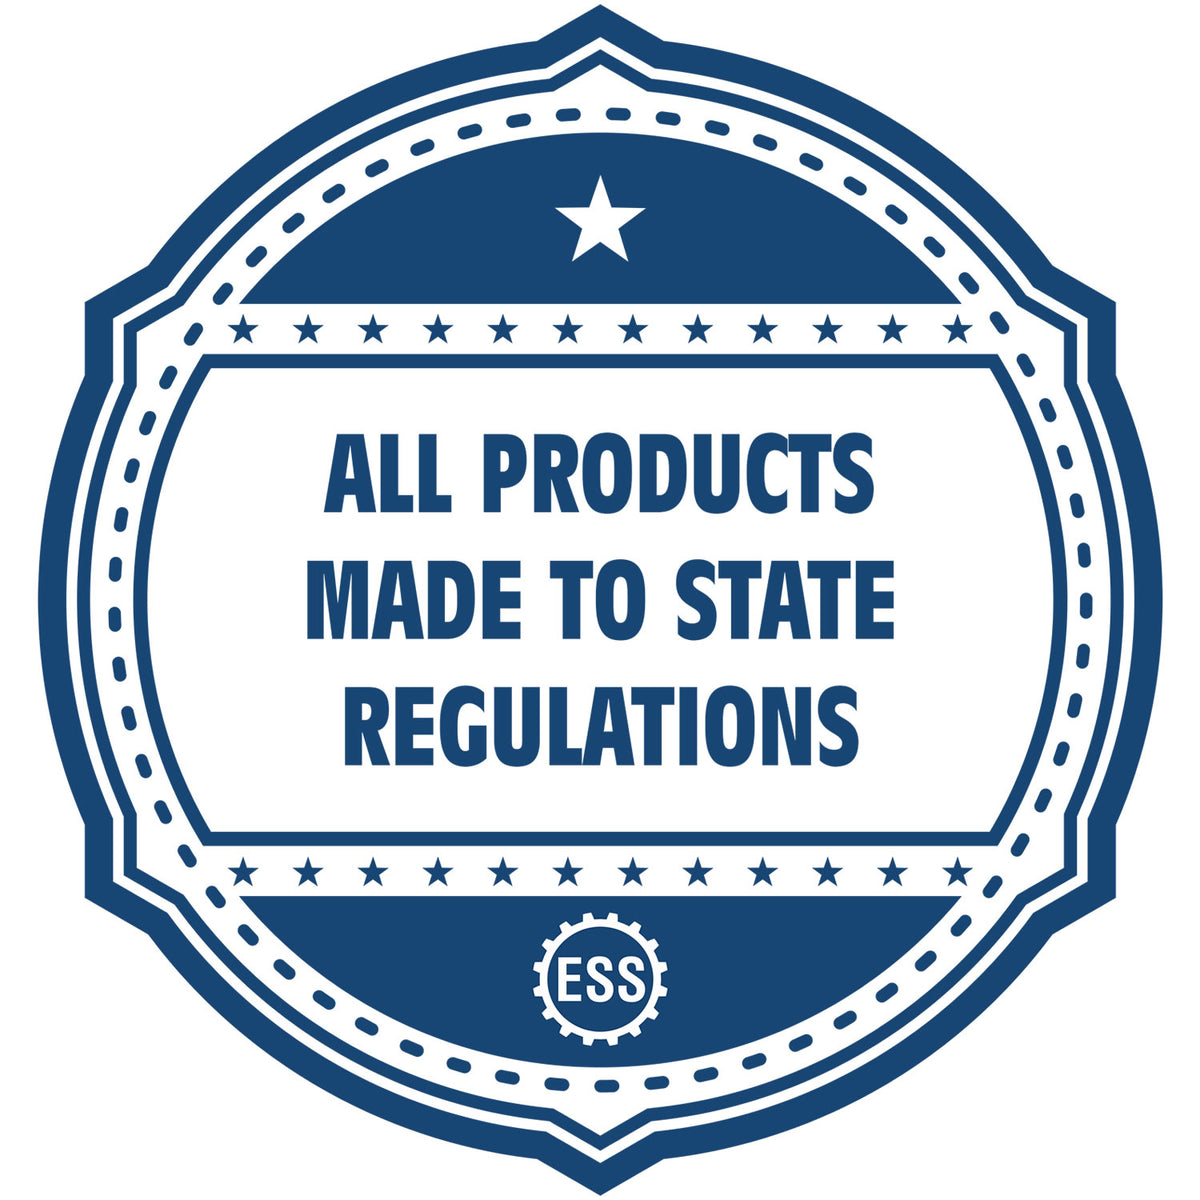 An icon or badge element for the Heavy-Duty Connecticut Rectangular Notary Stamp showing that this product is made in compliance with state regulations.